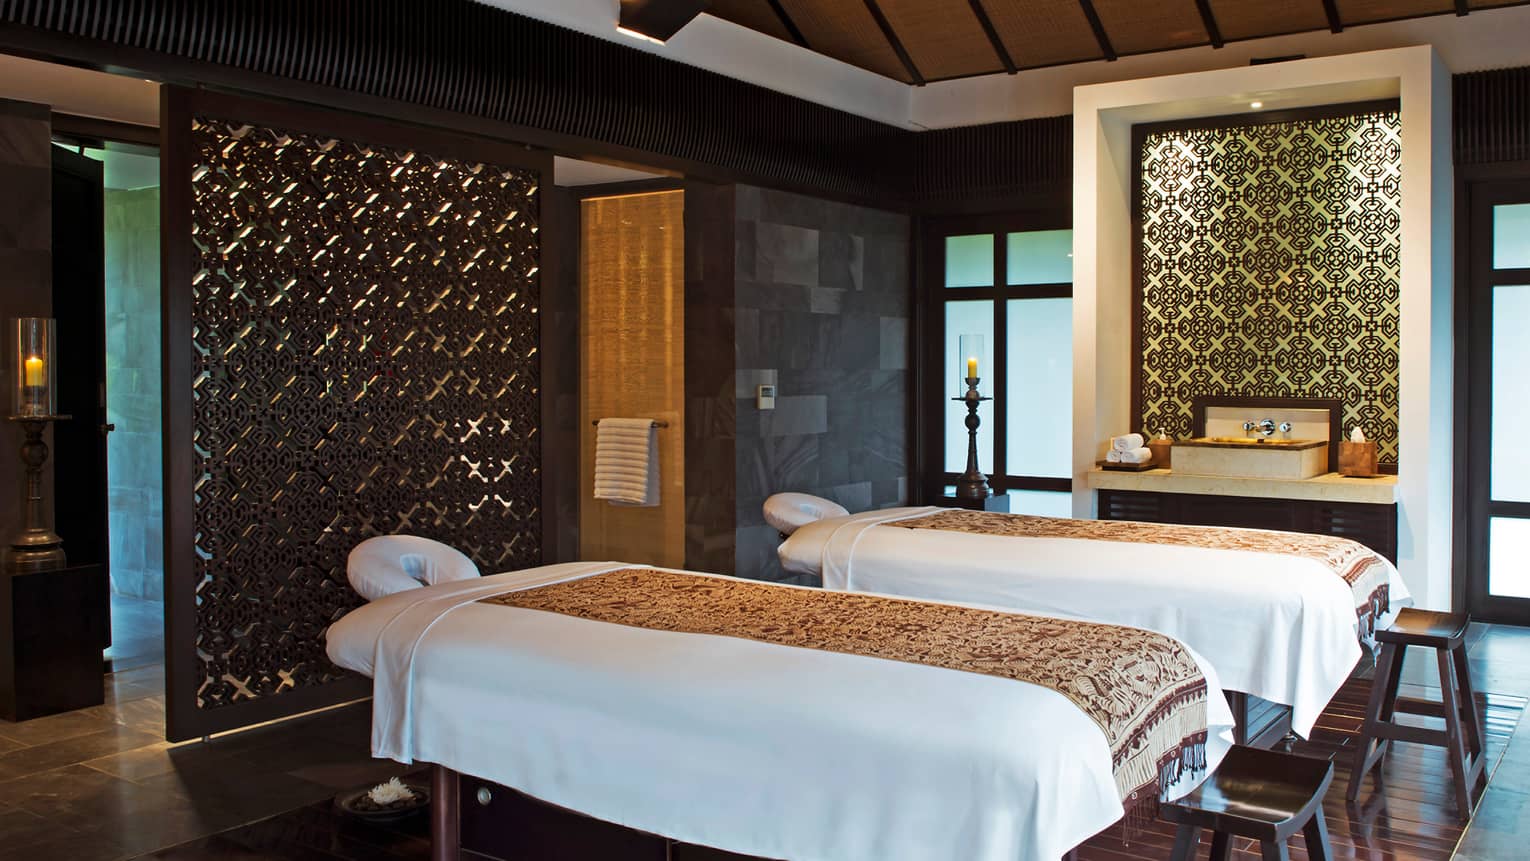 Couples massage tables side-by-side in spa treatment suite with decorative walls